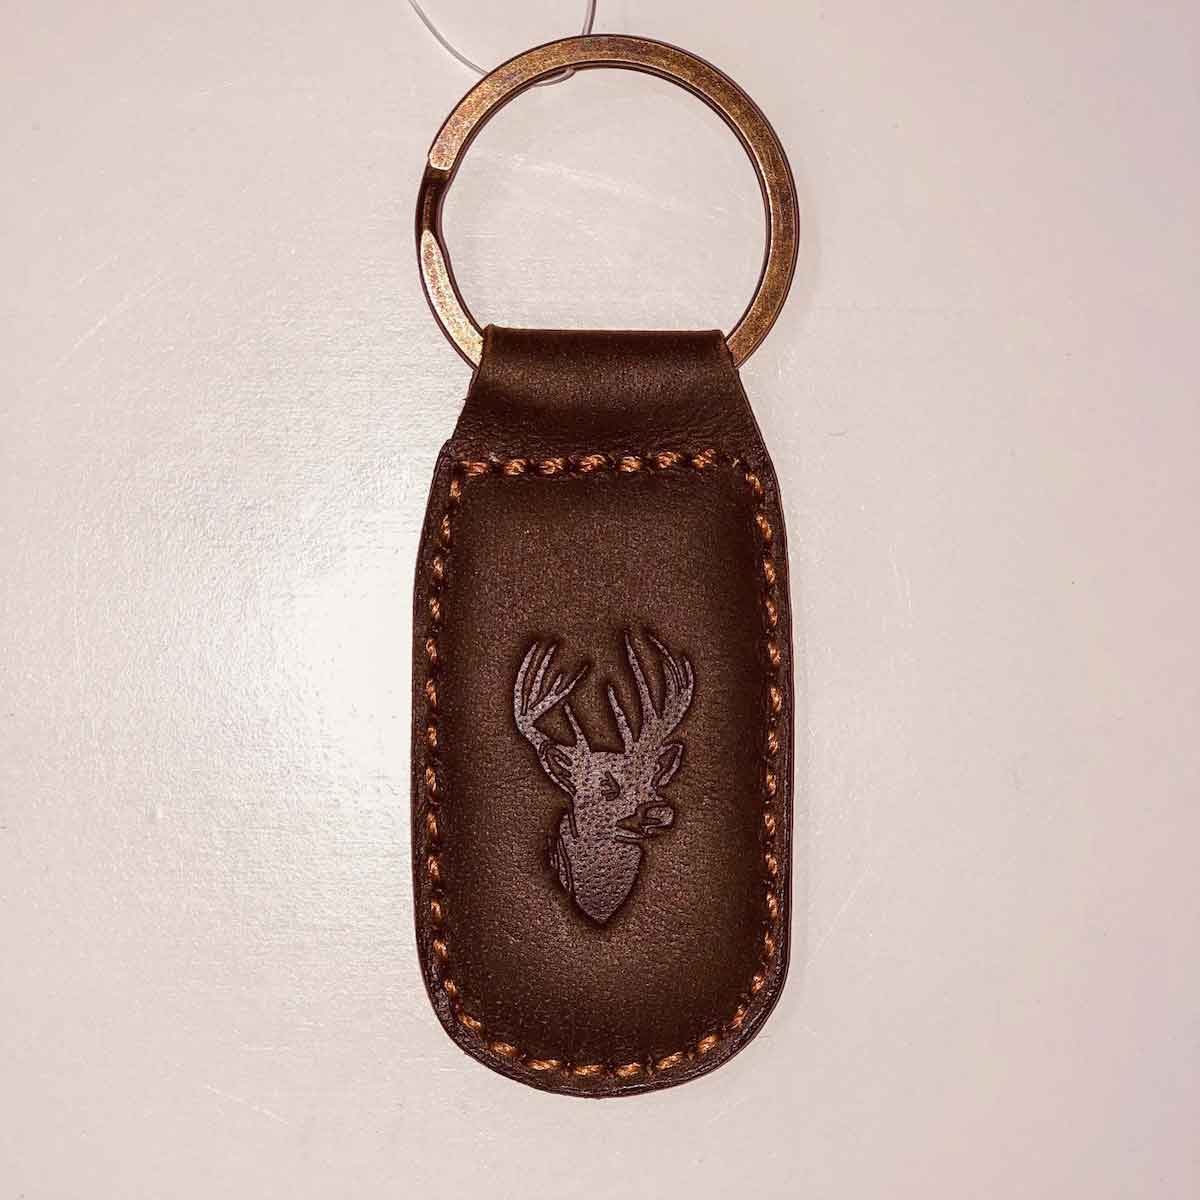 A Royal Standard Deer Leather Embossed Keychain with a deer head on it.